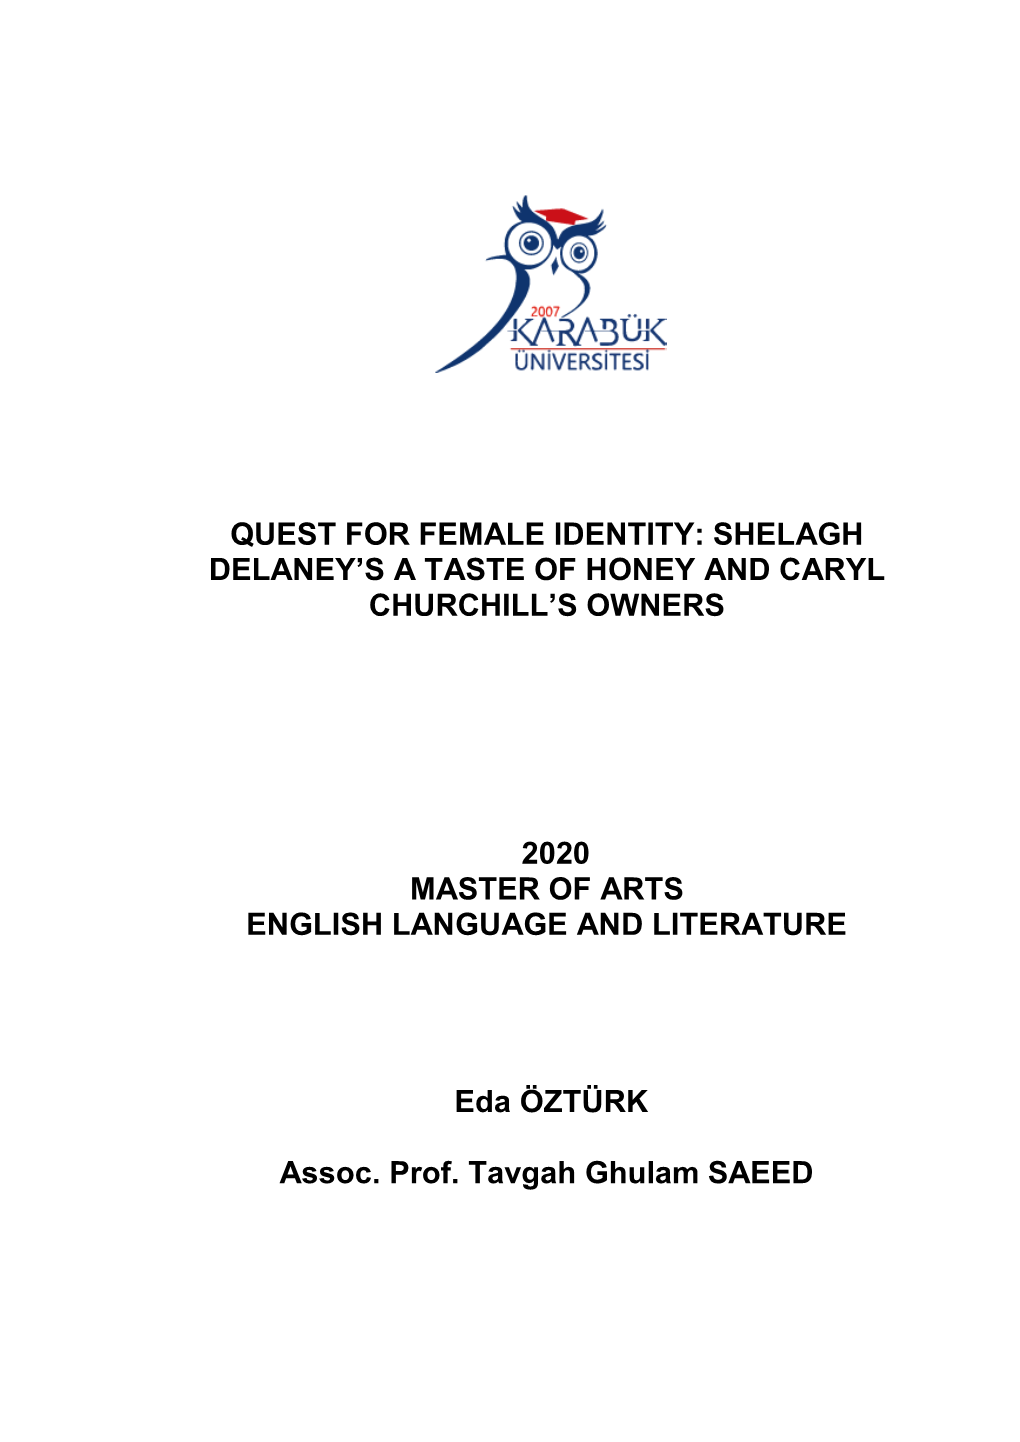 Quest for Female Identity: Shelagh Delaney's a Taste of Honey and Caryl Churchill's Owners 2020 Master of Arts English Lang